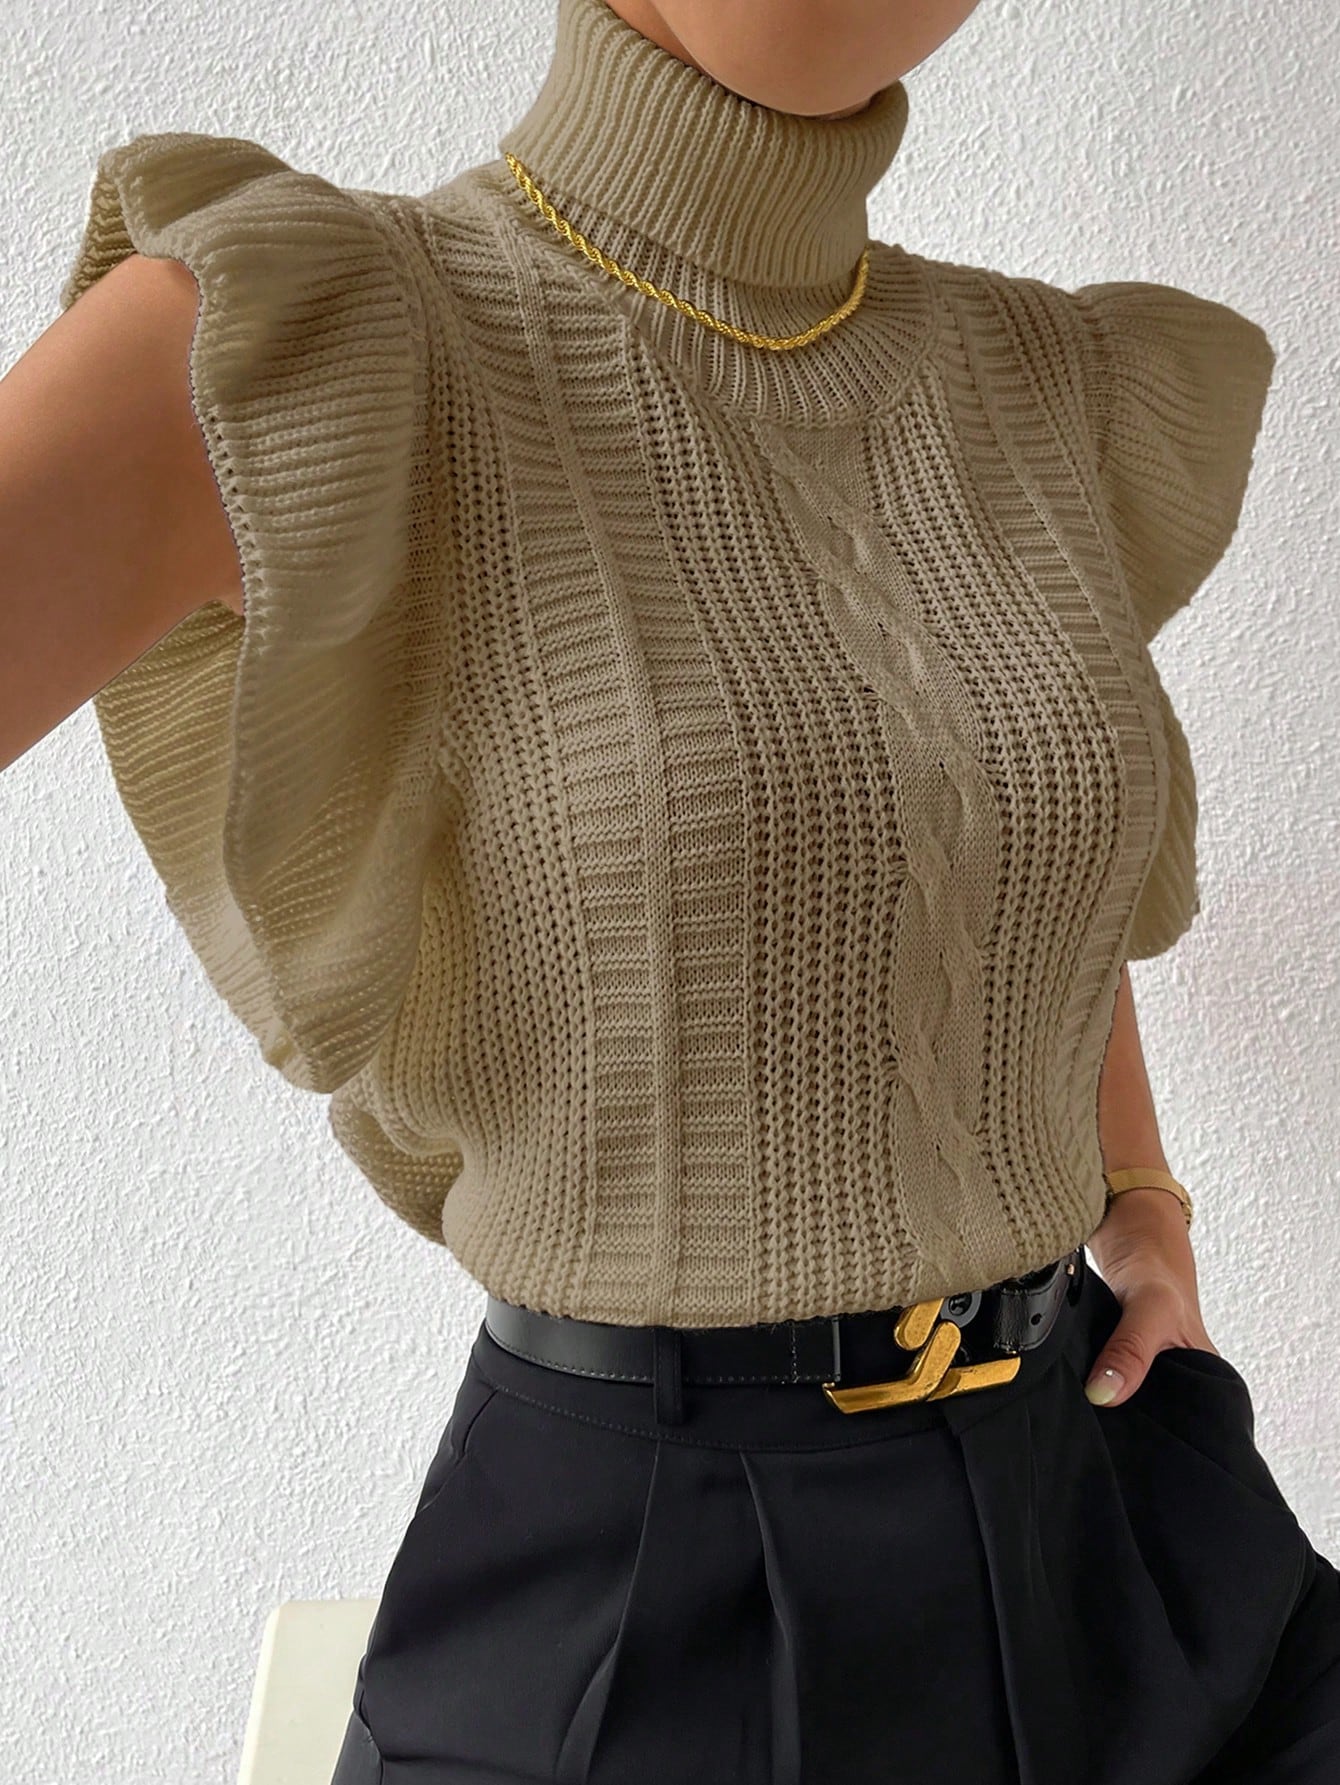 French Girl Turtle Neck Ruffle Trim Cable Knit Sweater Vest